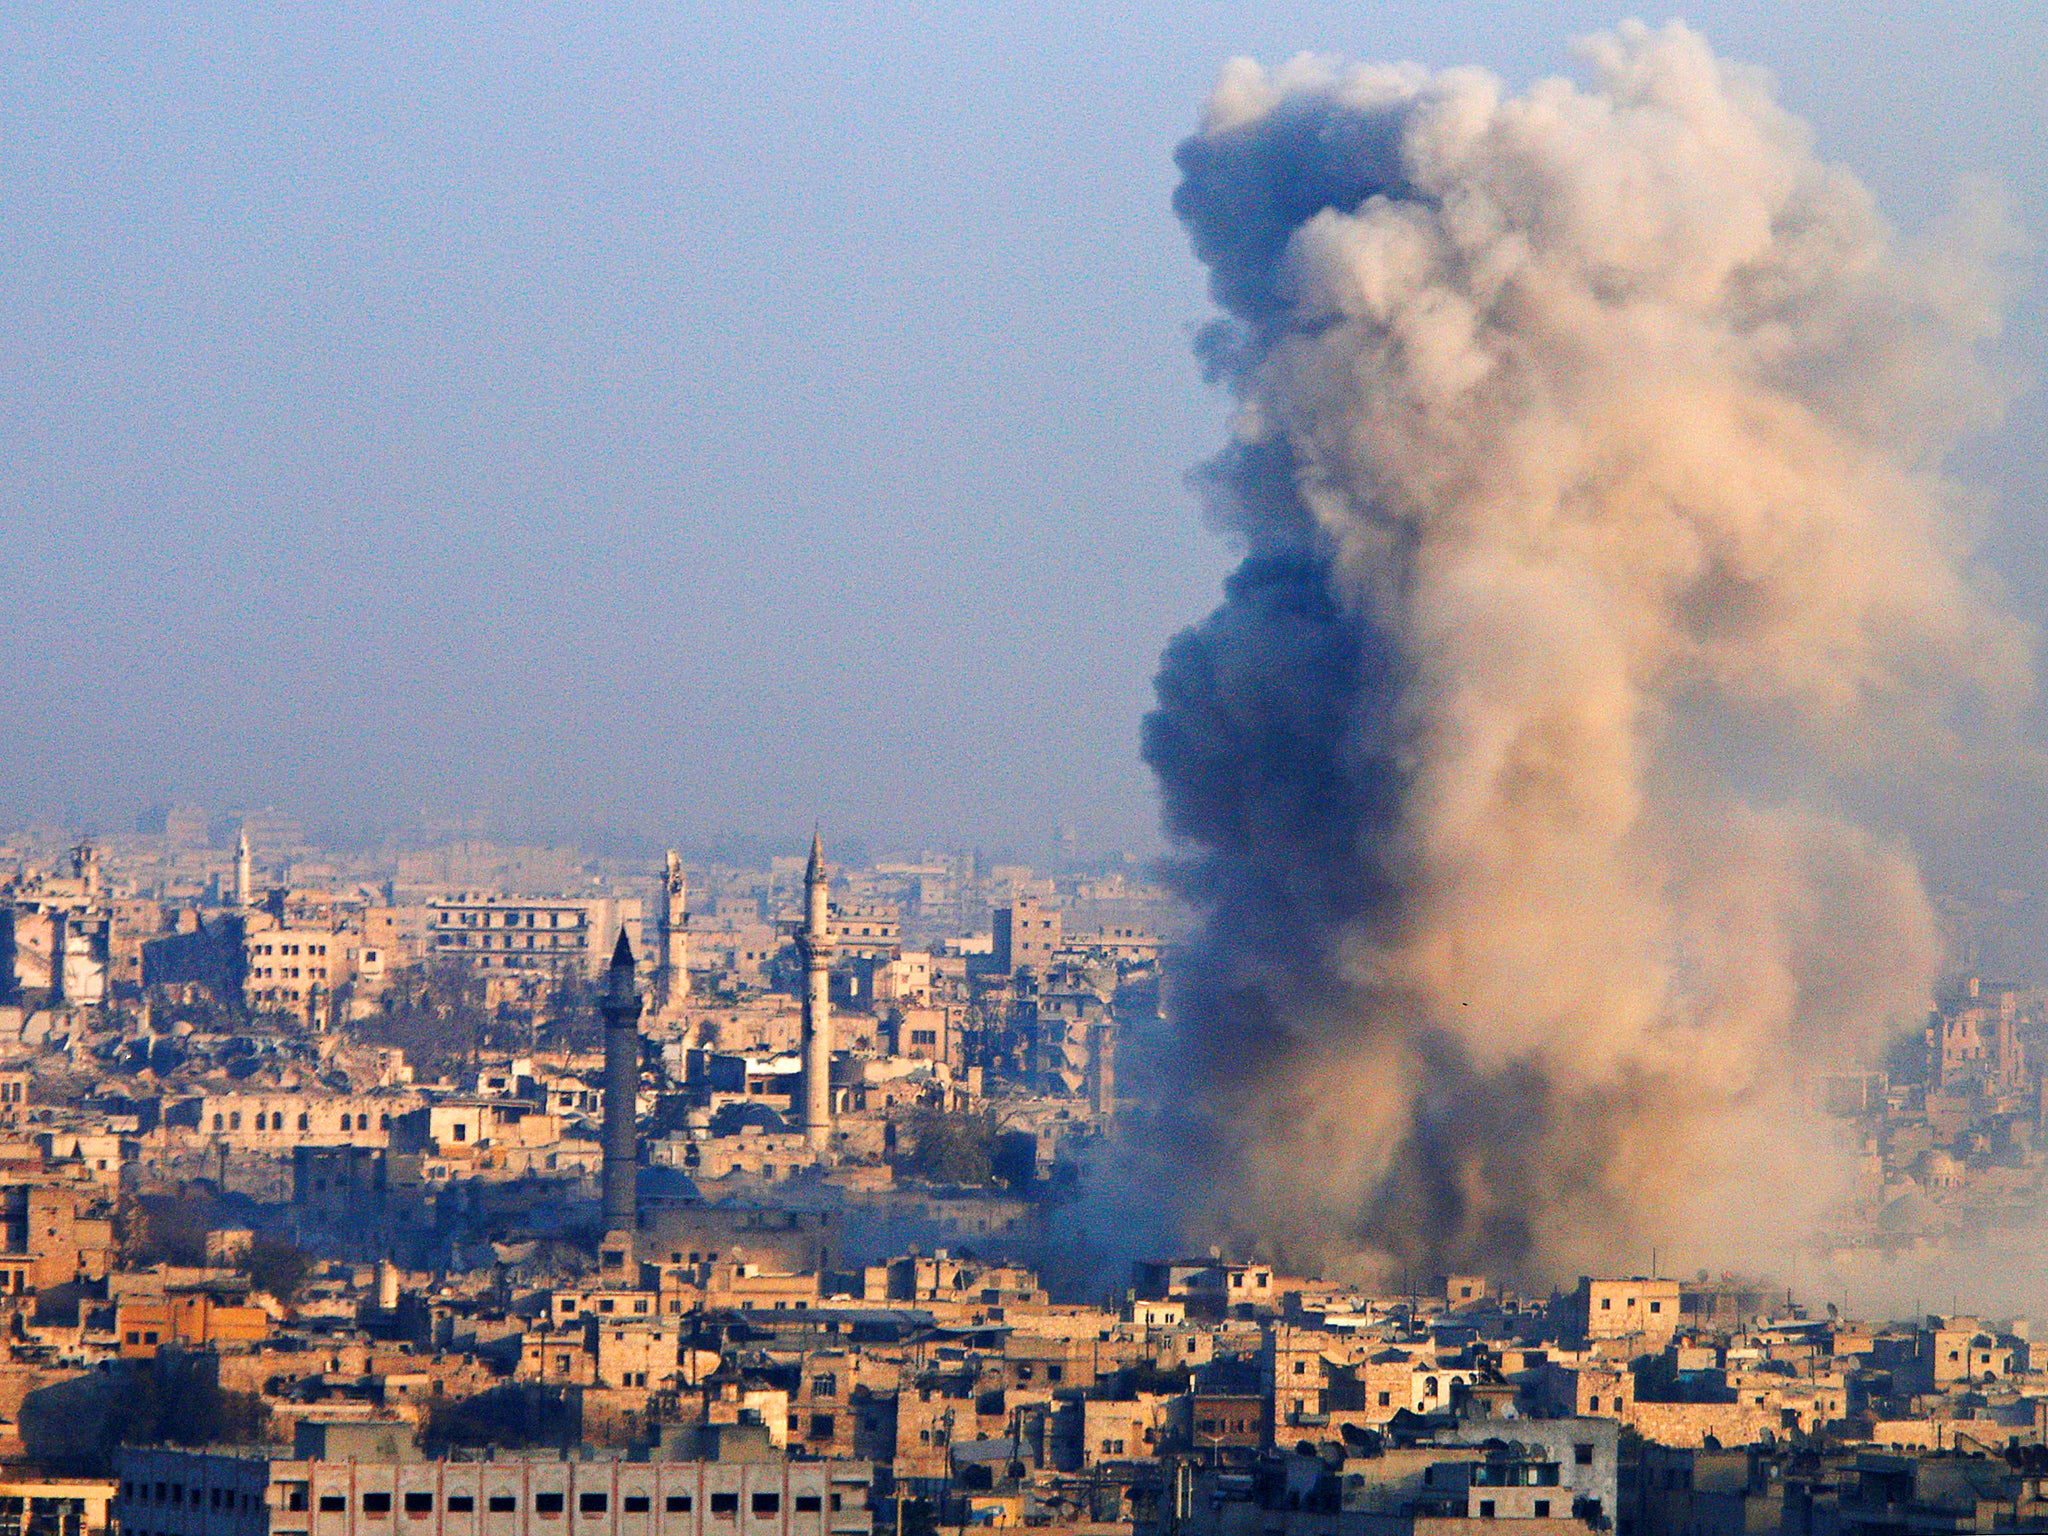  Smoke rises as seen from a governement-held area of Aleppo, Syria